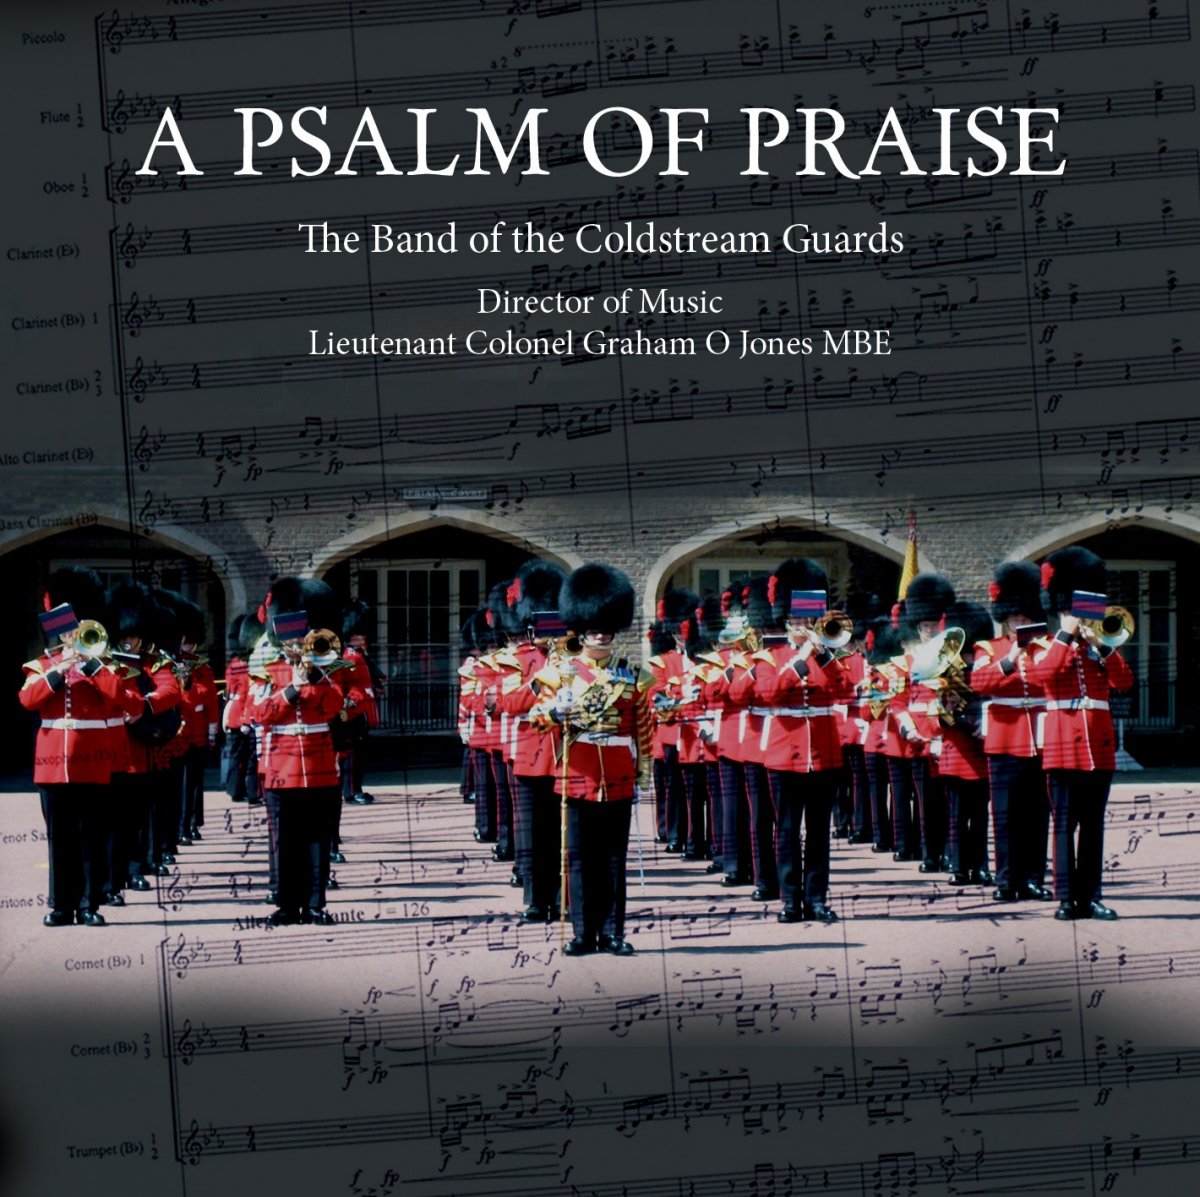 A Psalm of Praise - cliquer ici